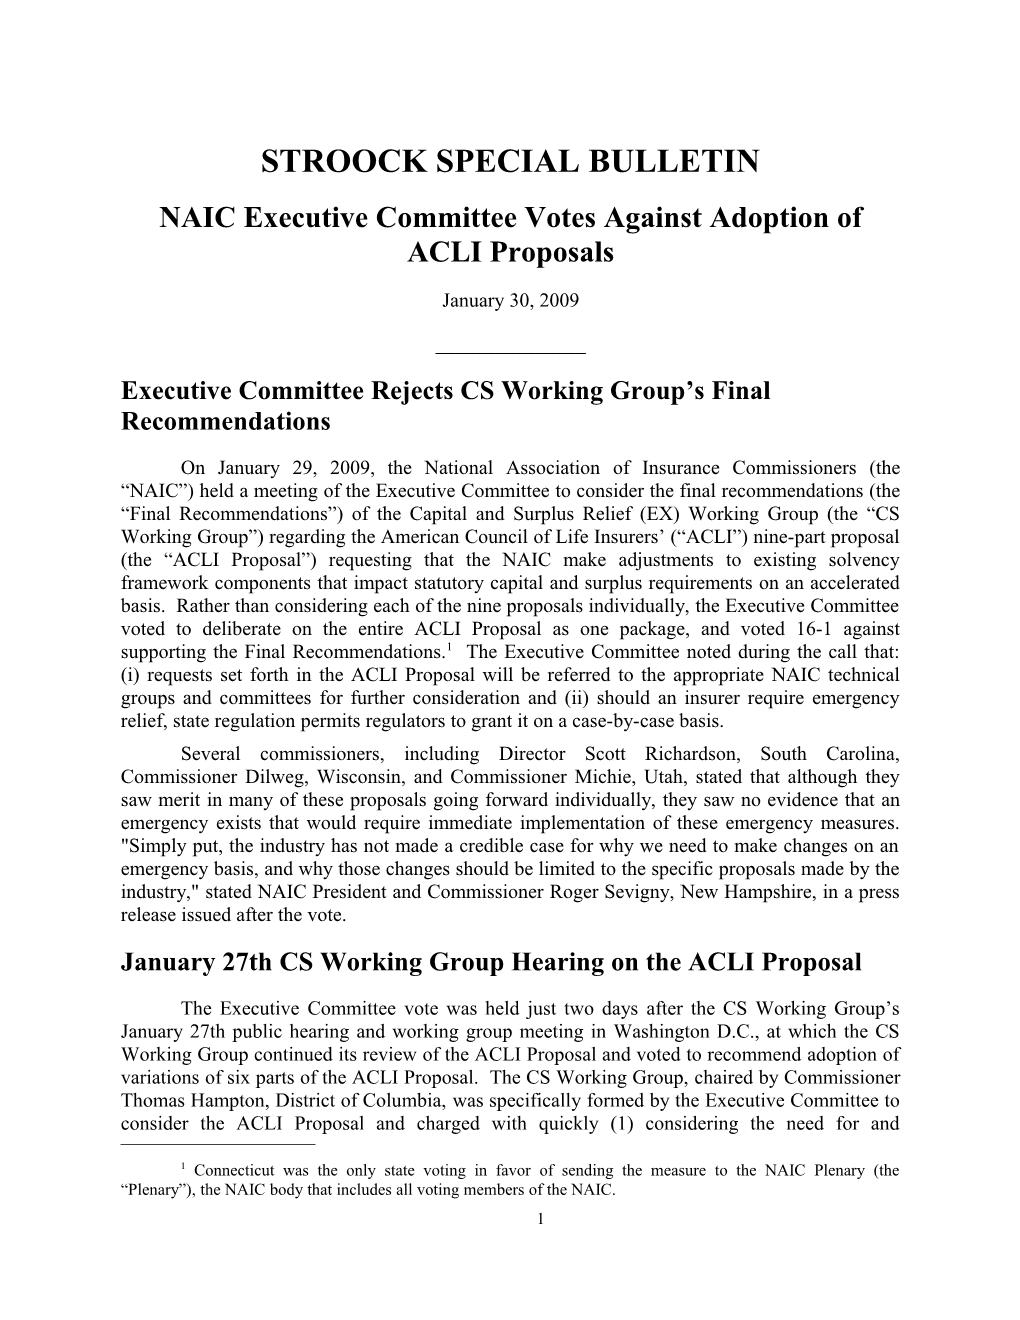 1/27/09 Public Hearing of the NAIC Capital and Surplus Relief (EX) Working Group